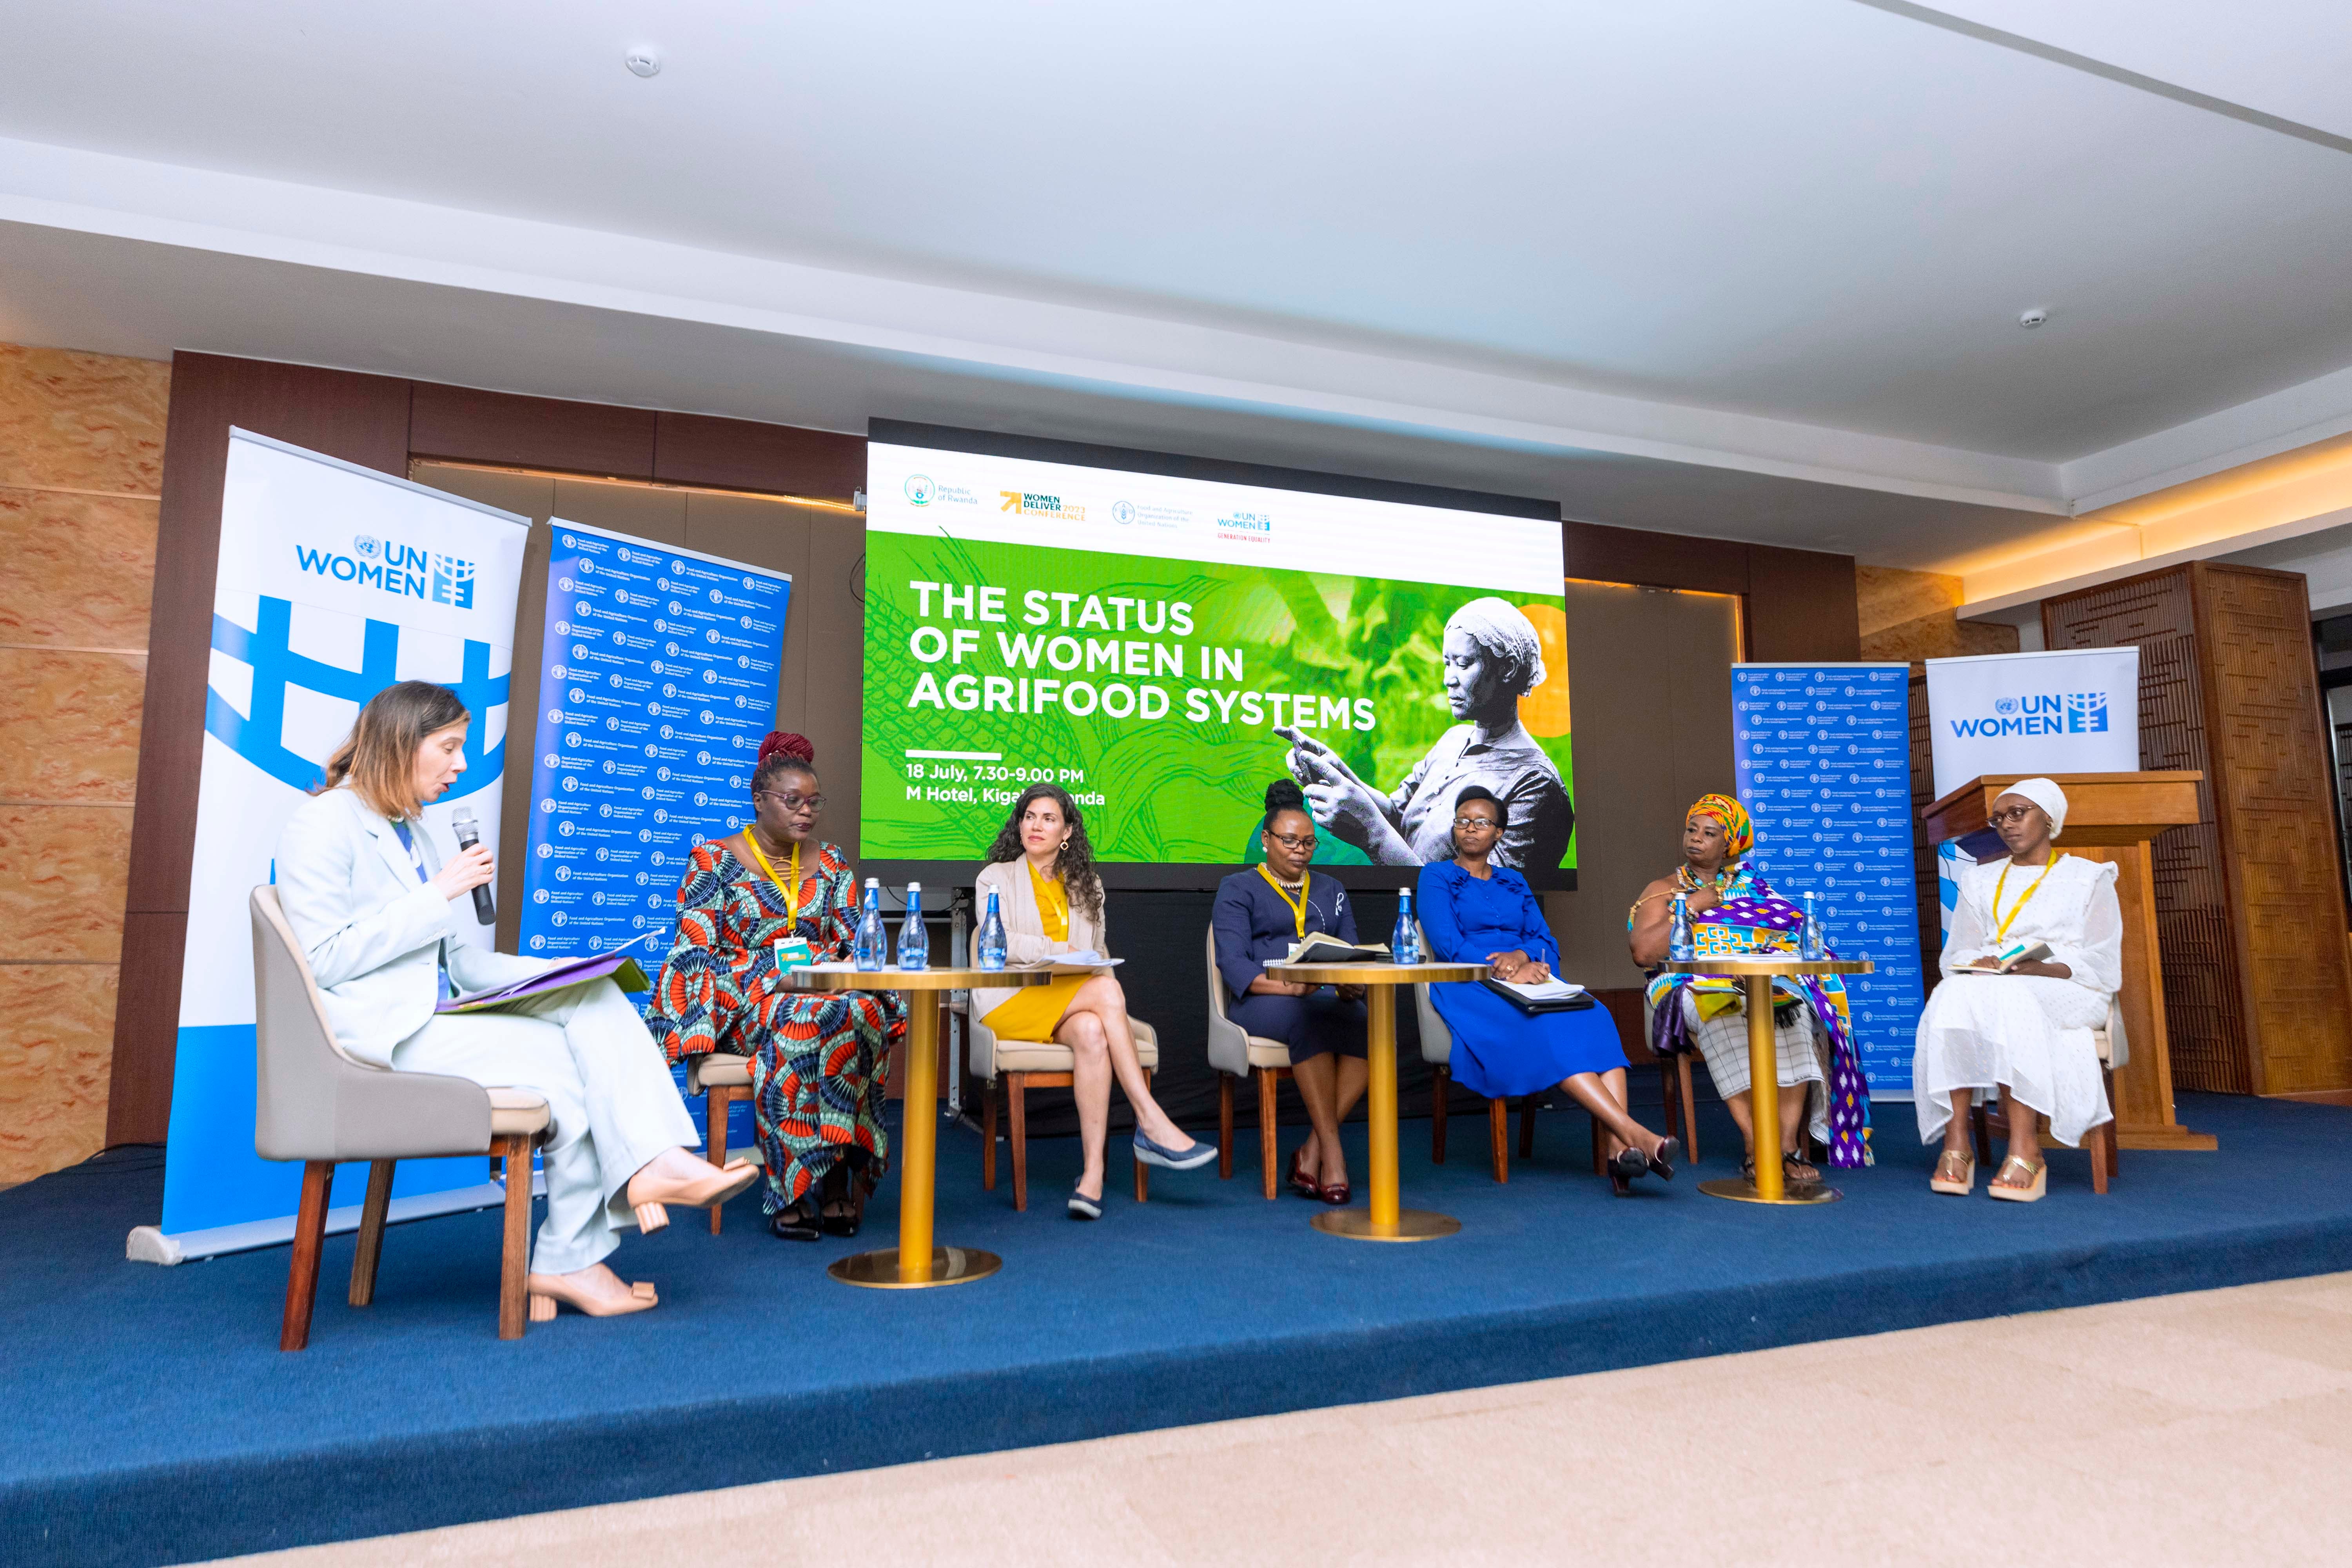 Panel discussion at the UN Women Rwanda and FAO Rwanda side event on The Status of Women in Agrifood Systems. Photo: UN Women/Emmanual Rurangwa